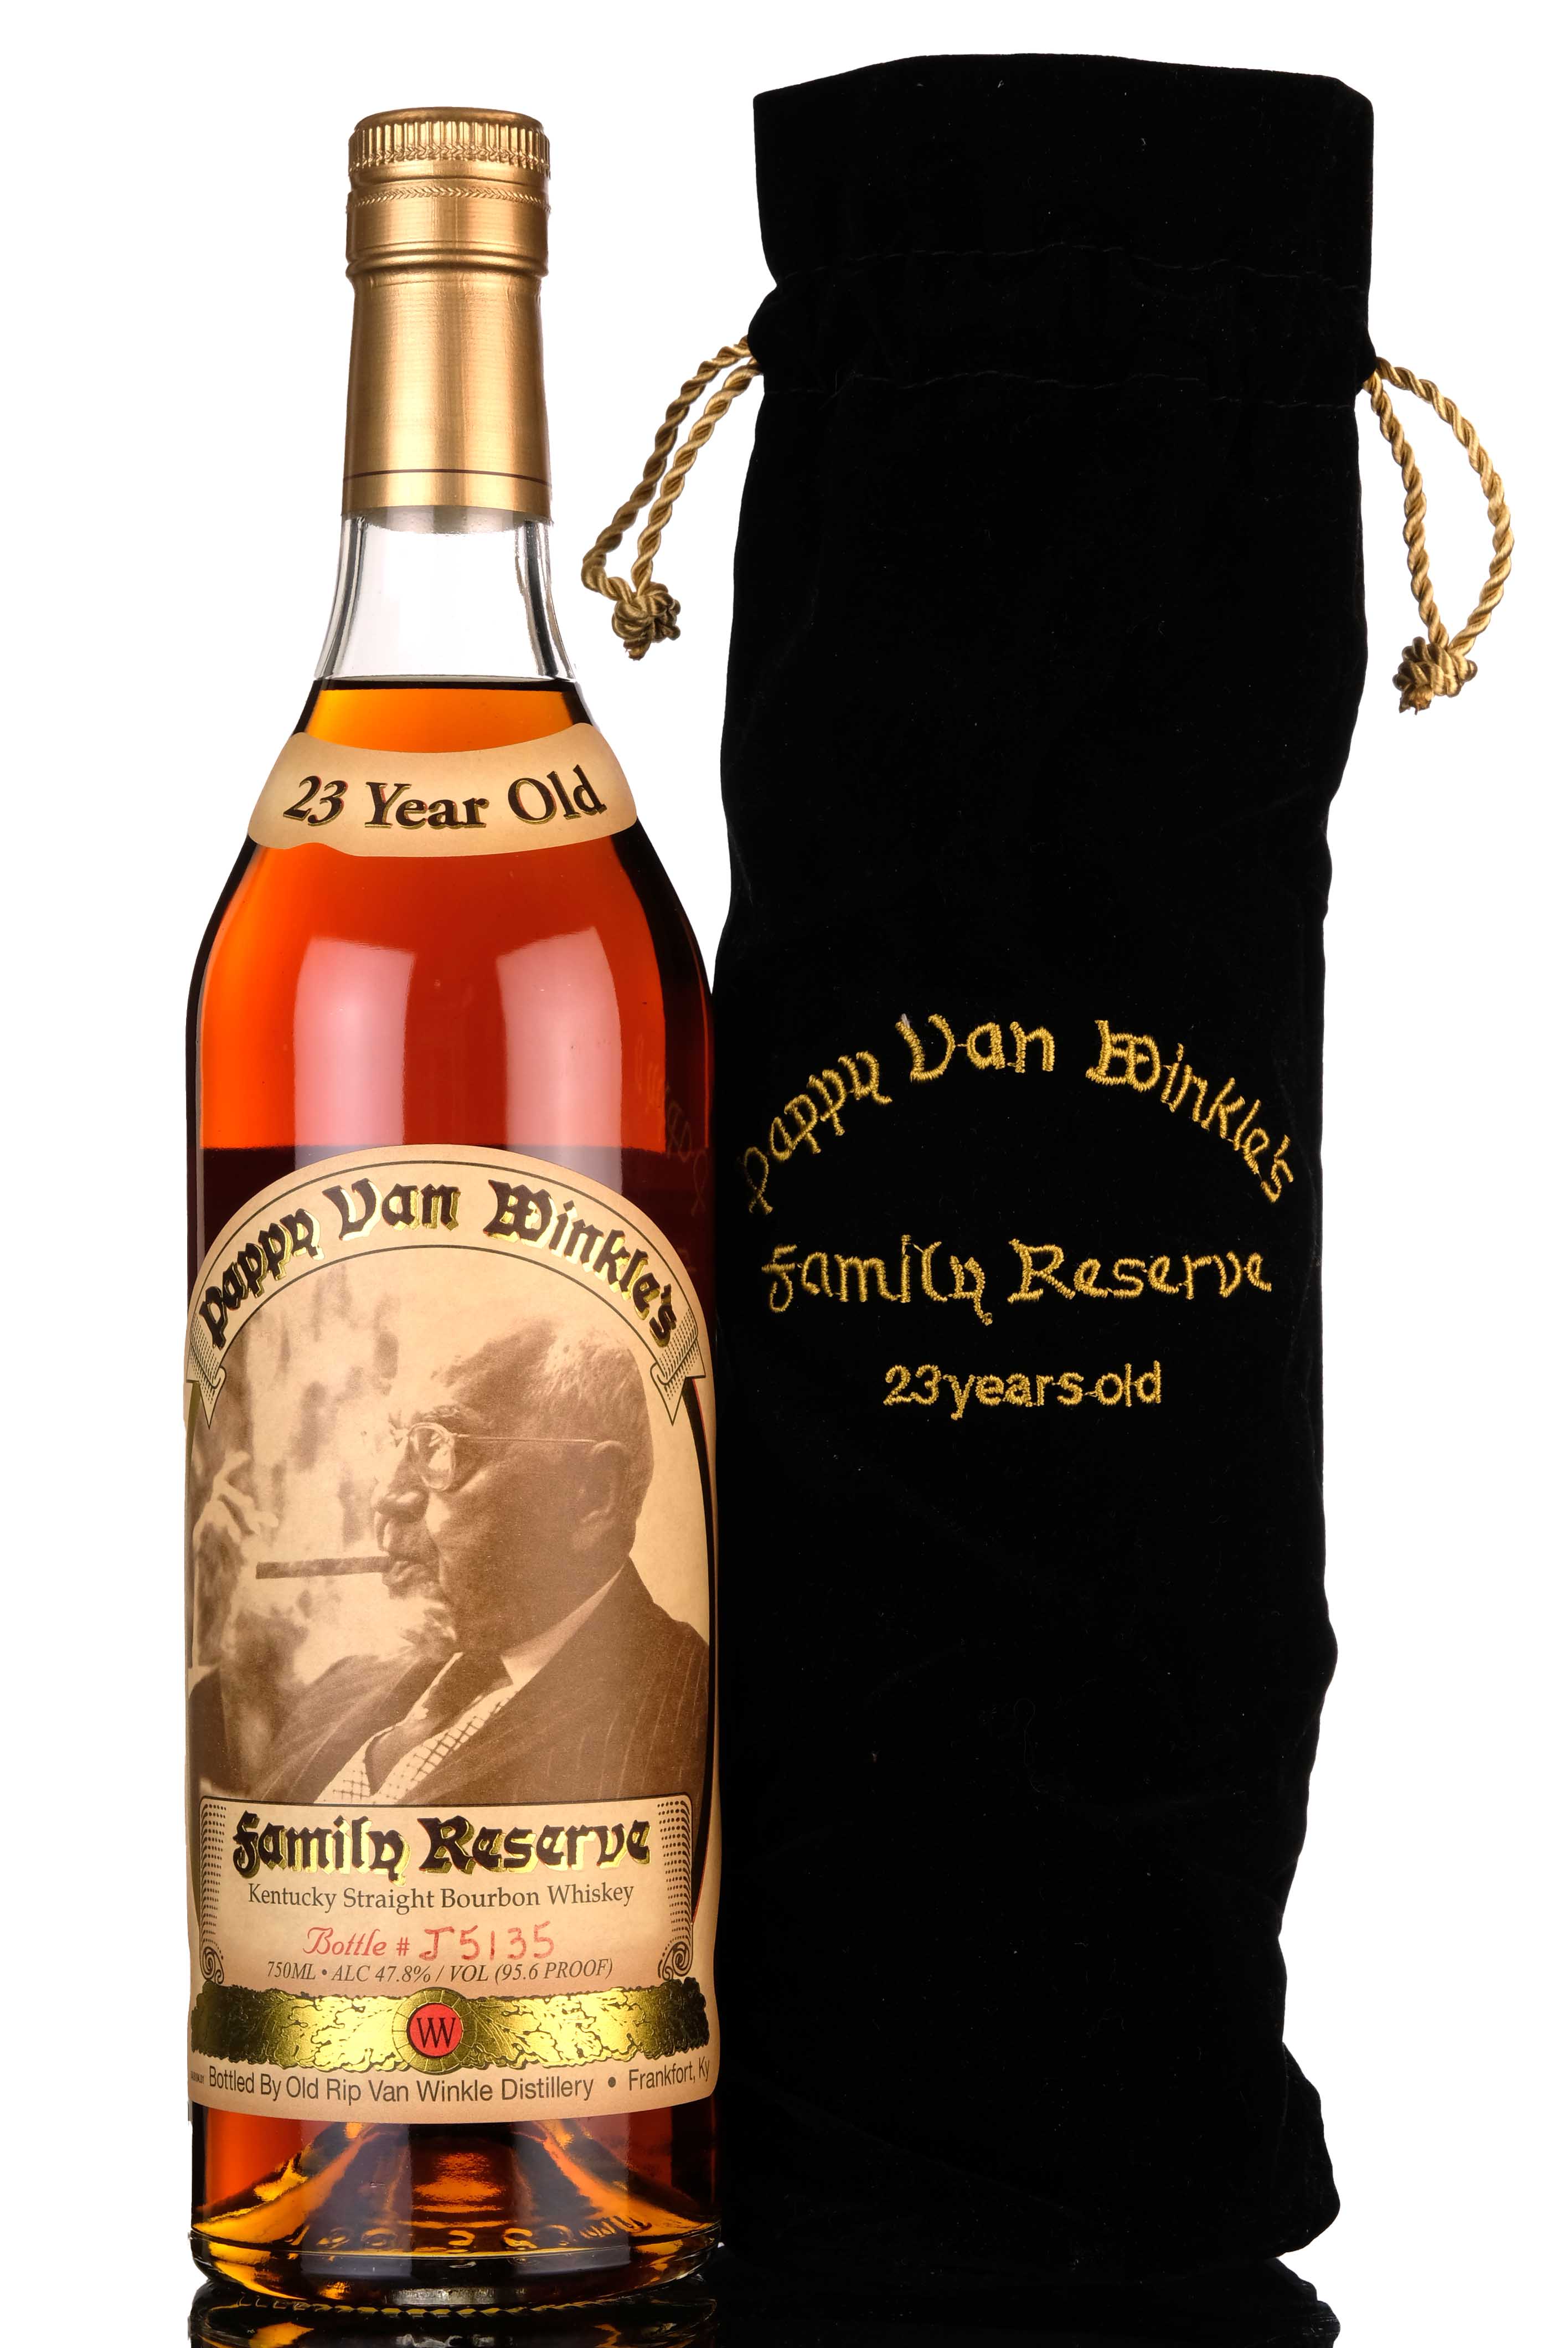 Pappy Van Winkles Family Reserve - 23 Year Old - Kentucky Straight Bourbon Whiskey - 2018